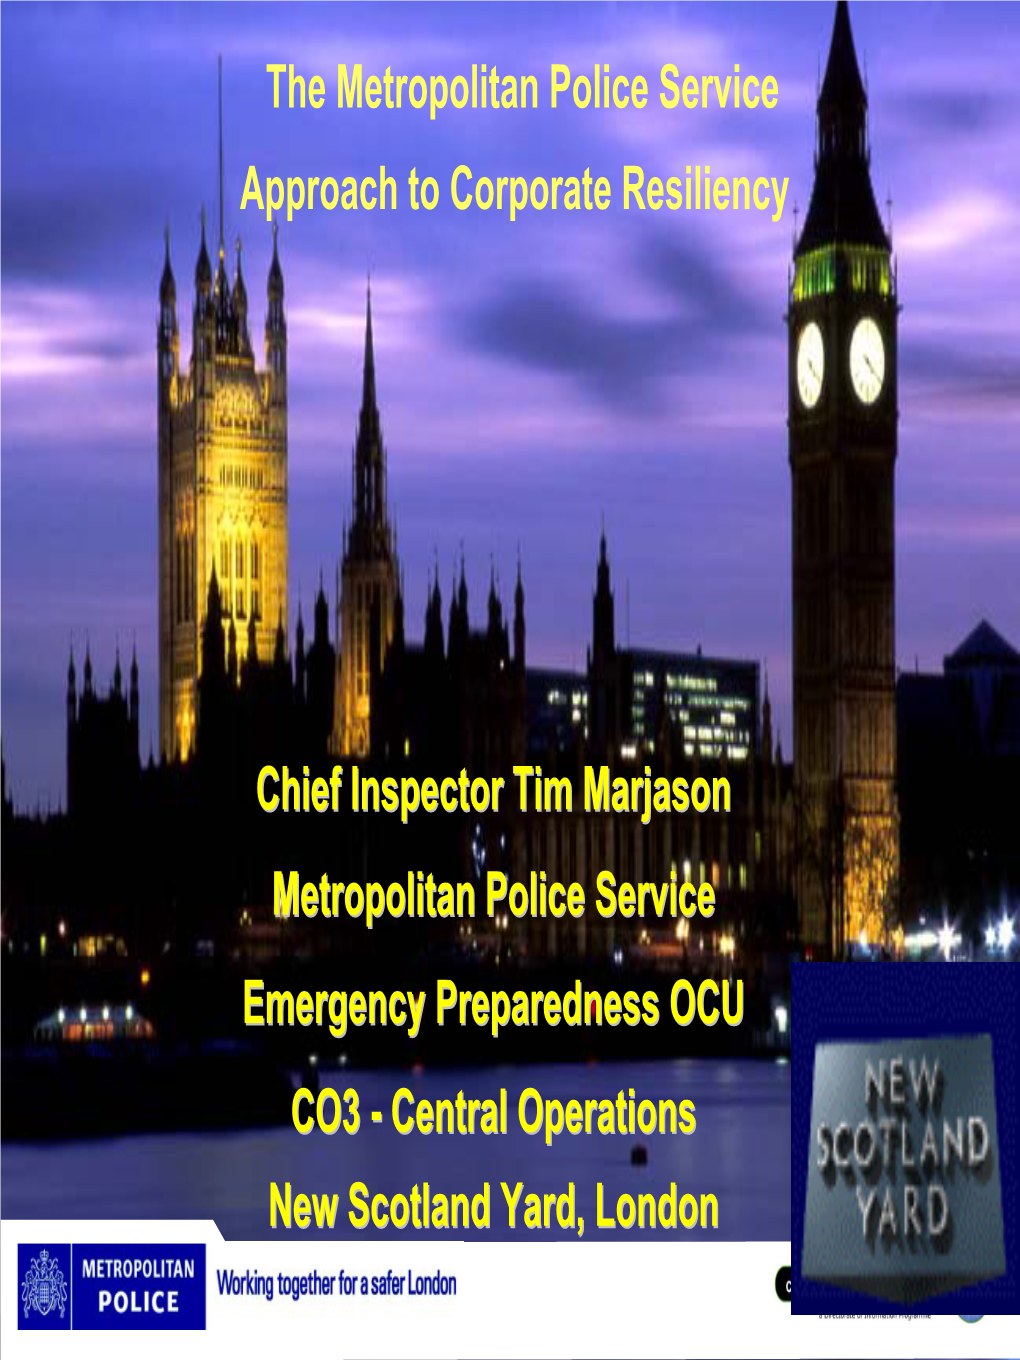 The Metropolitan Police Service Approach to Corporate Resiliency